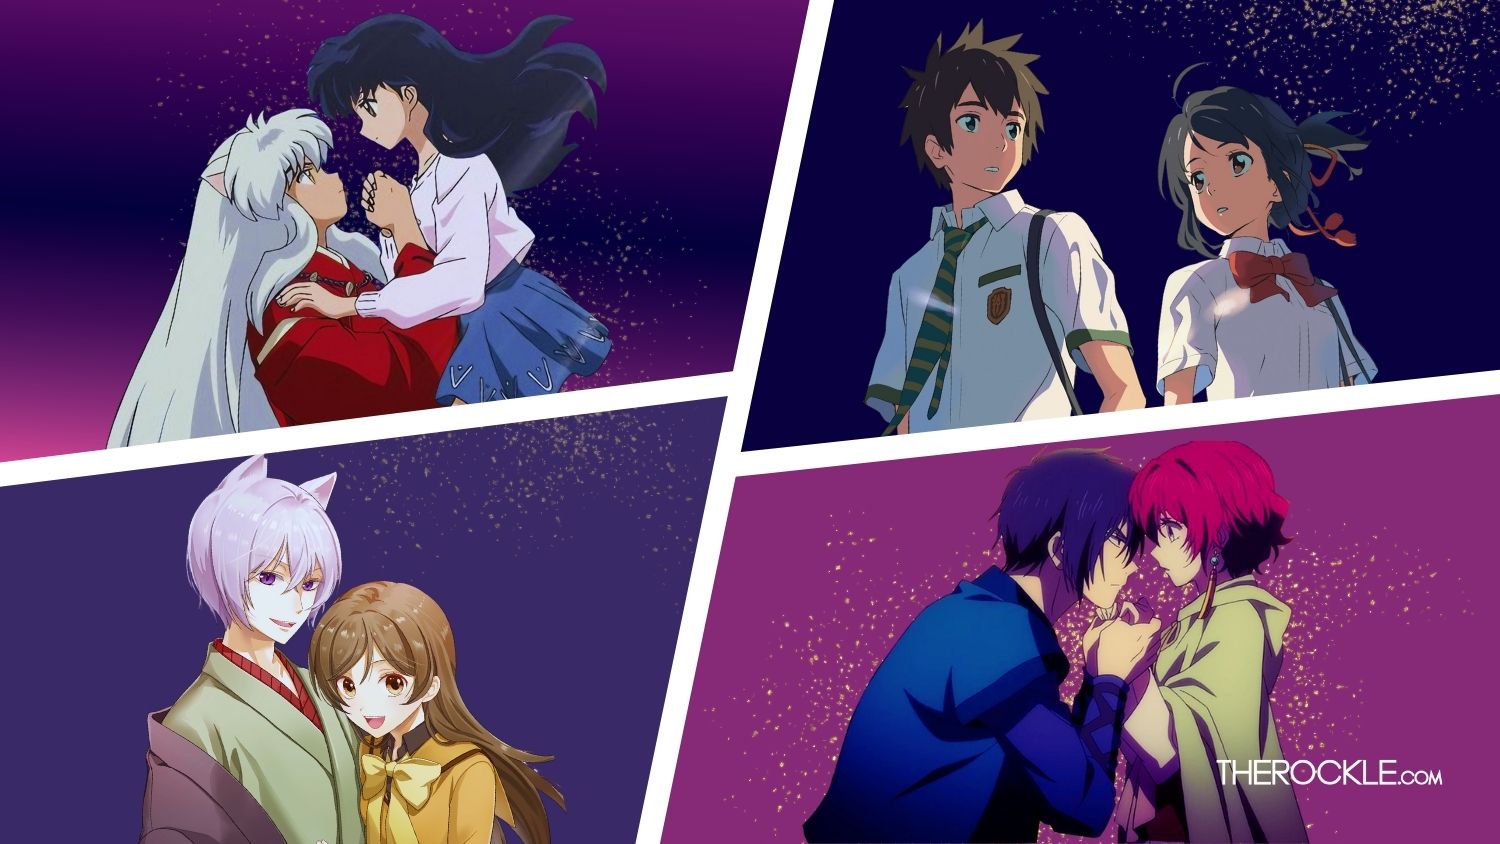 We Can’t Stop Swooning Over These 10 Fantasy Romance Anime and You Won’t Either